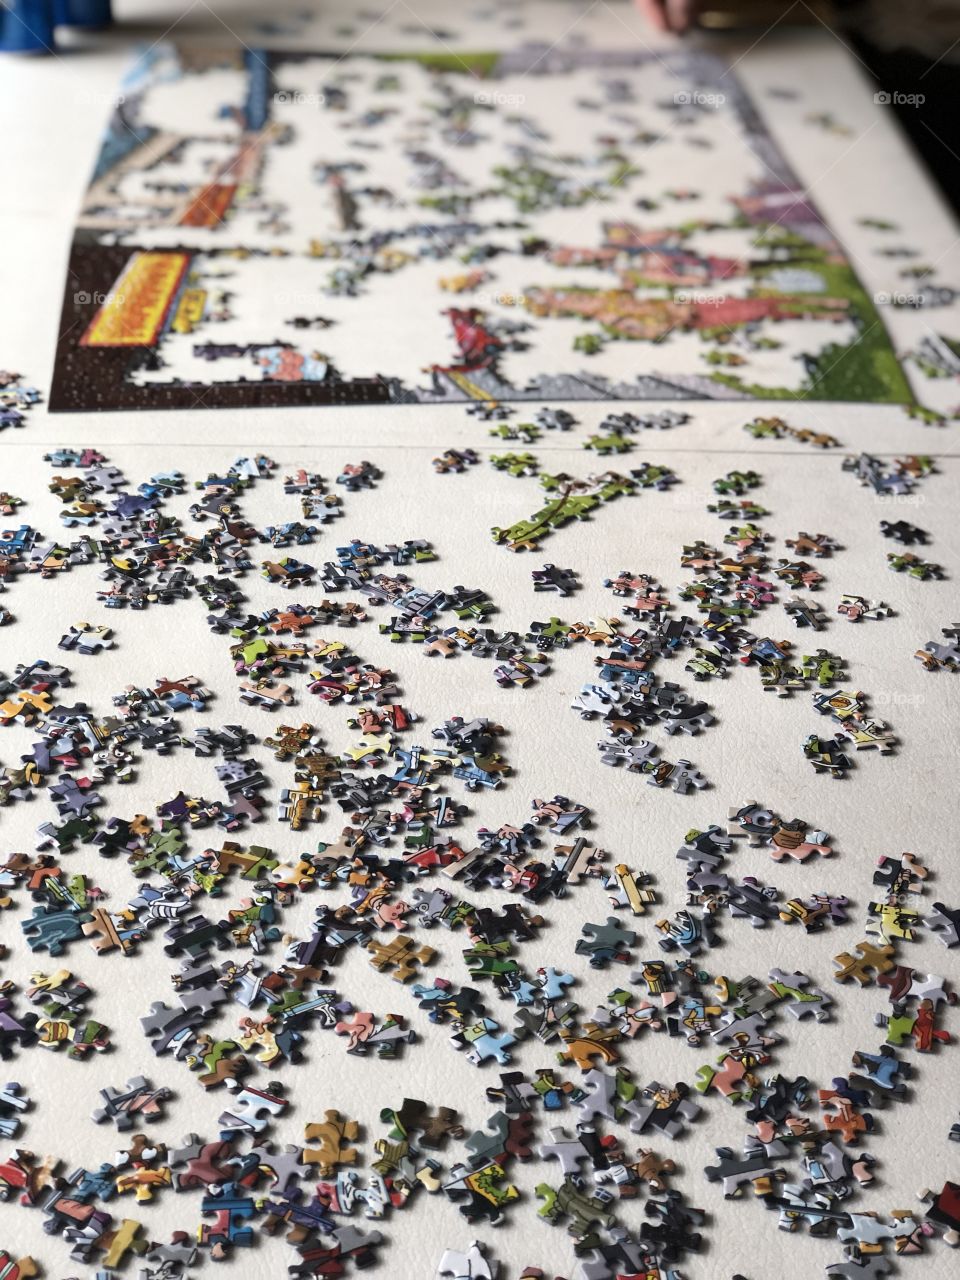 Puzzling 